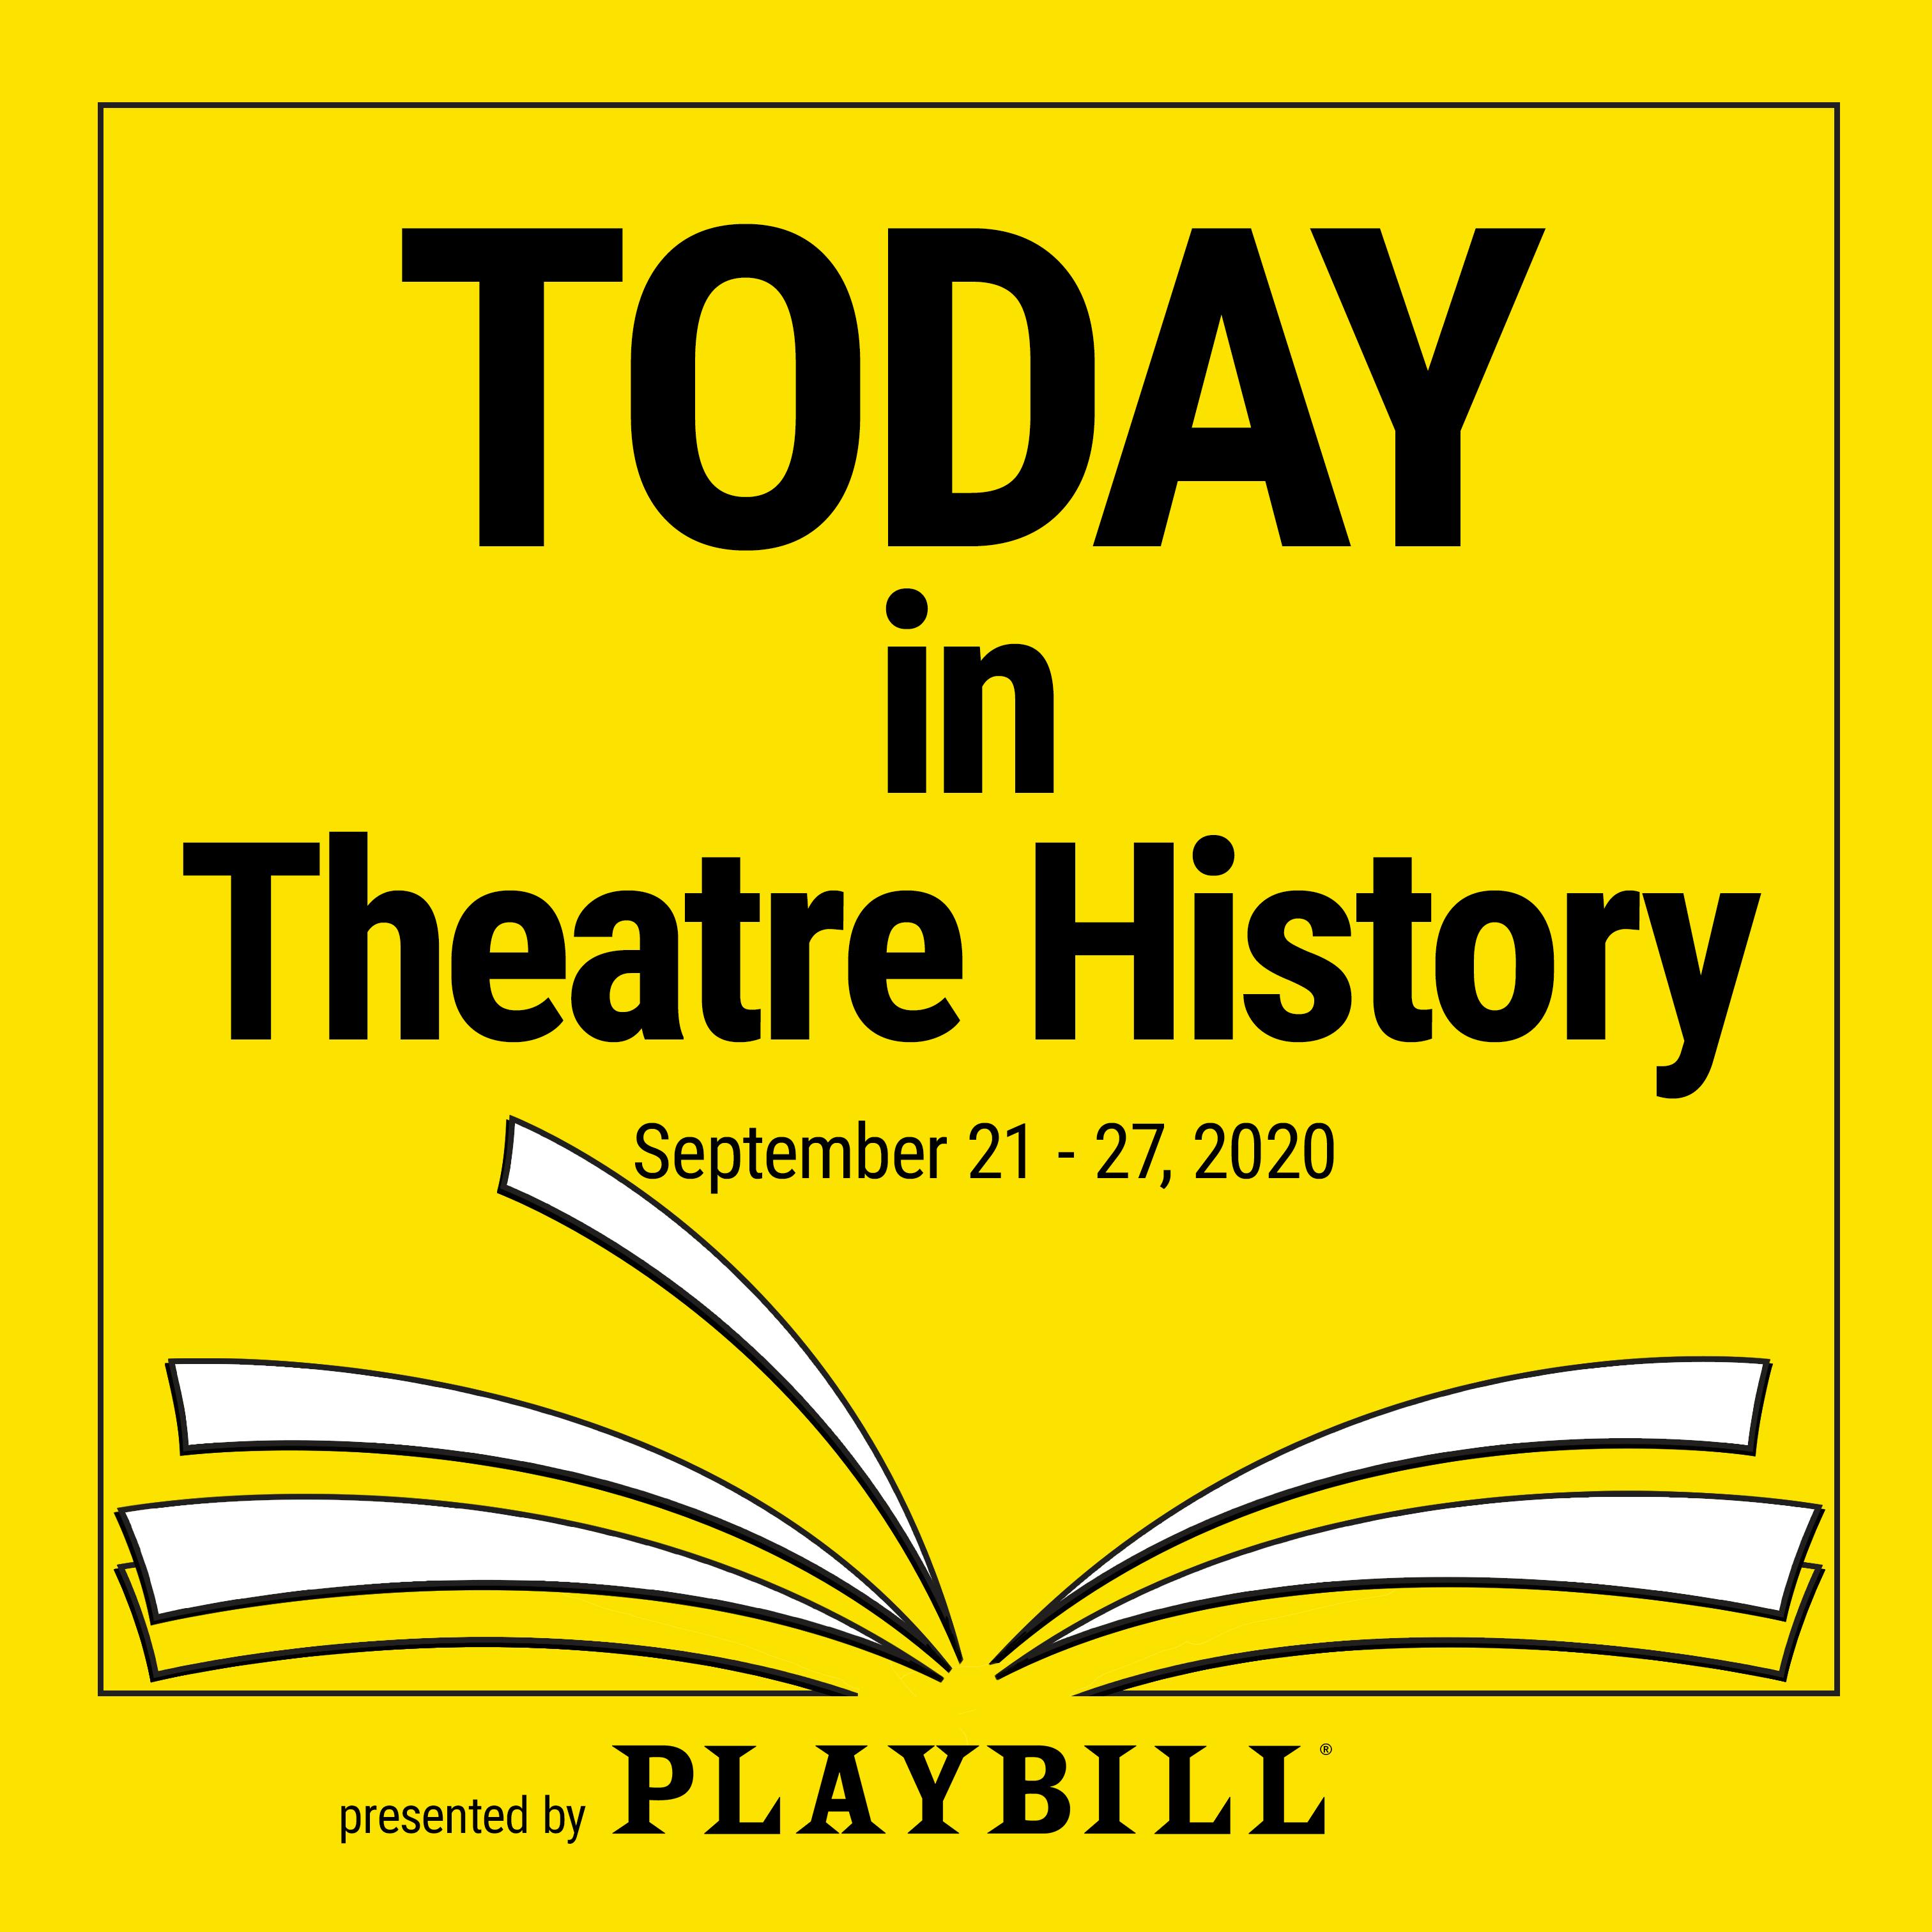 September 21-27, 2020: 20 years later, Merman returns in a revival of Annie Get Your Gun, Angela Lansbury opens in Gypsy, and Elizabeth Ashley becomes an icon in Cat on a Hot Tin Roof.